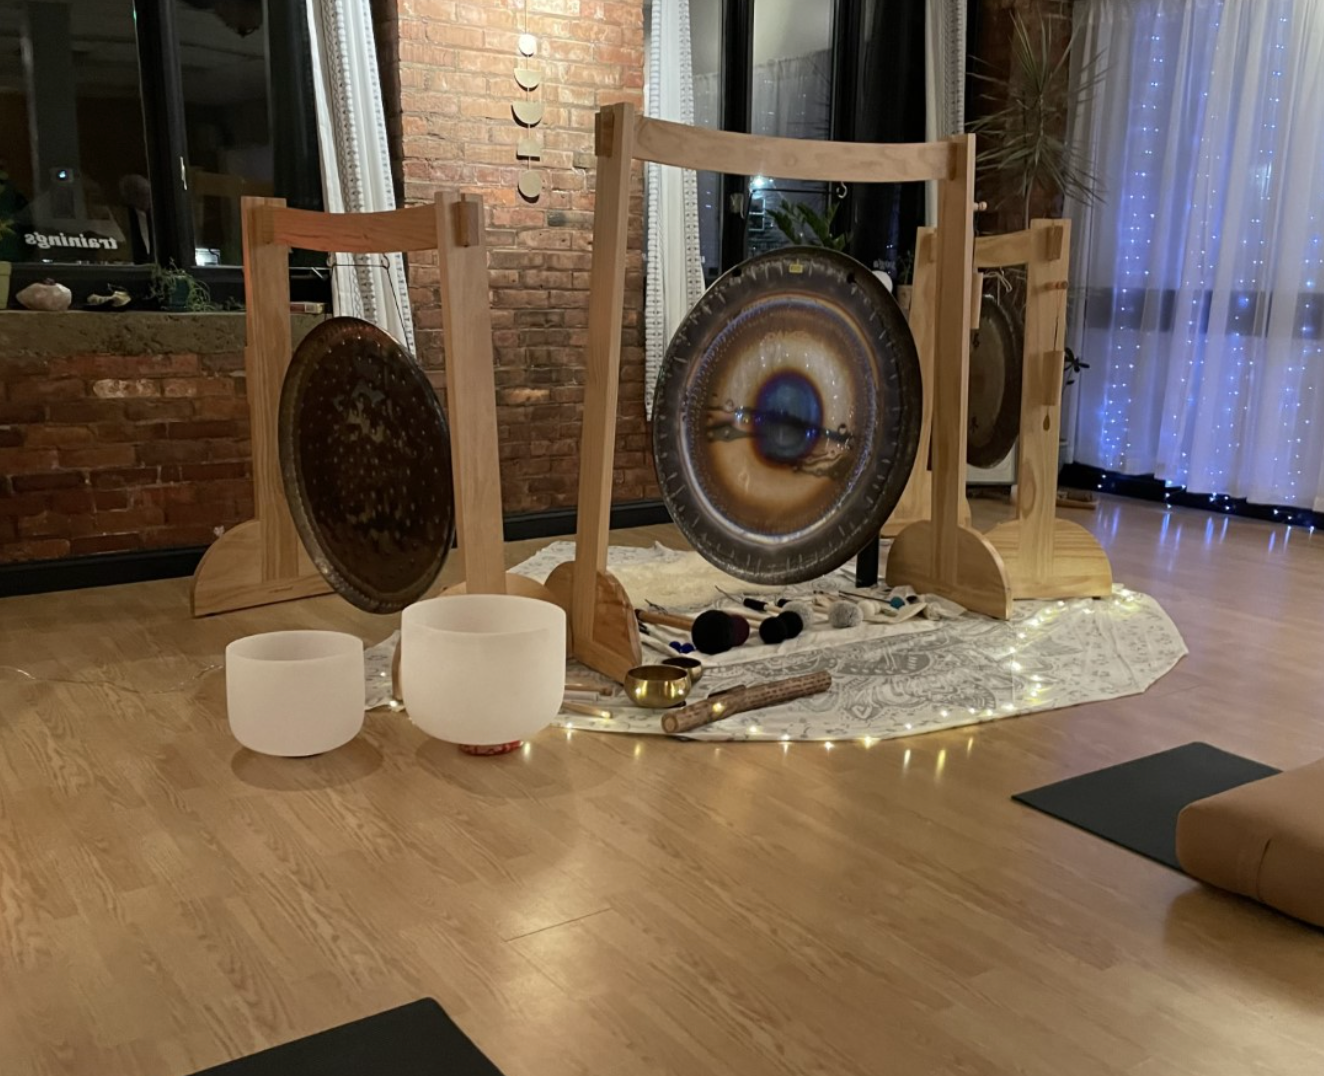 Sound Meditation with Group Reiki - Sun, May 7th @ 11:15 AM-12:15 PM